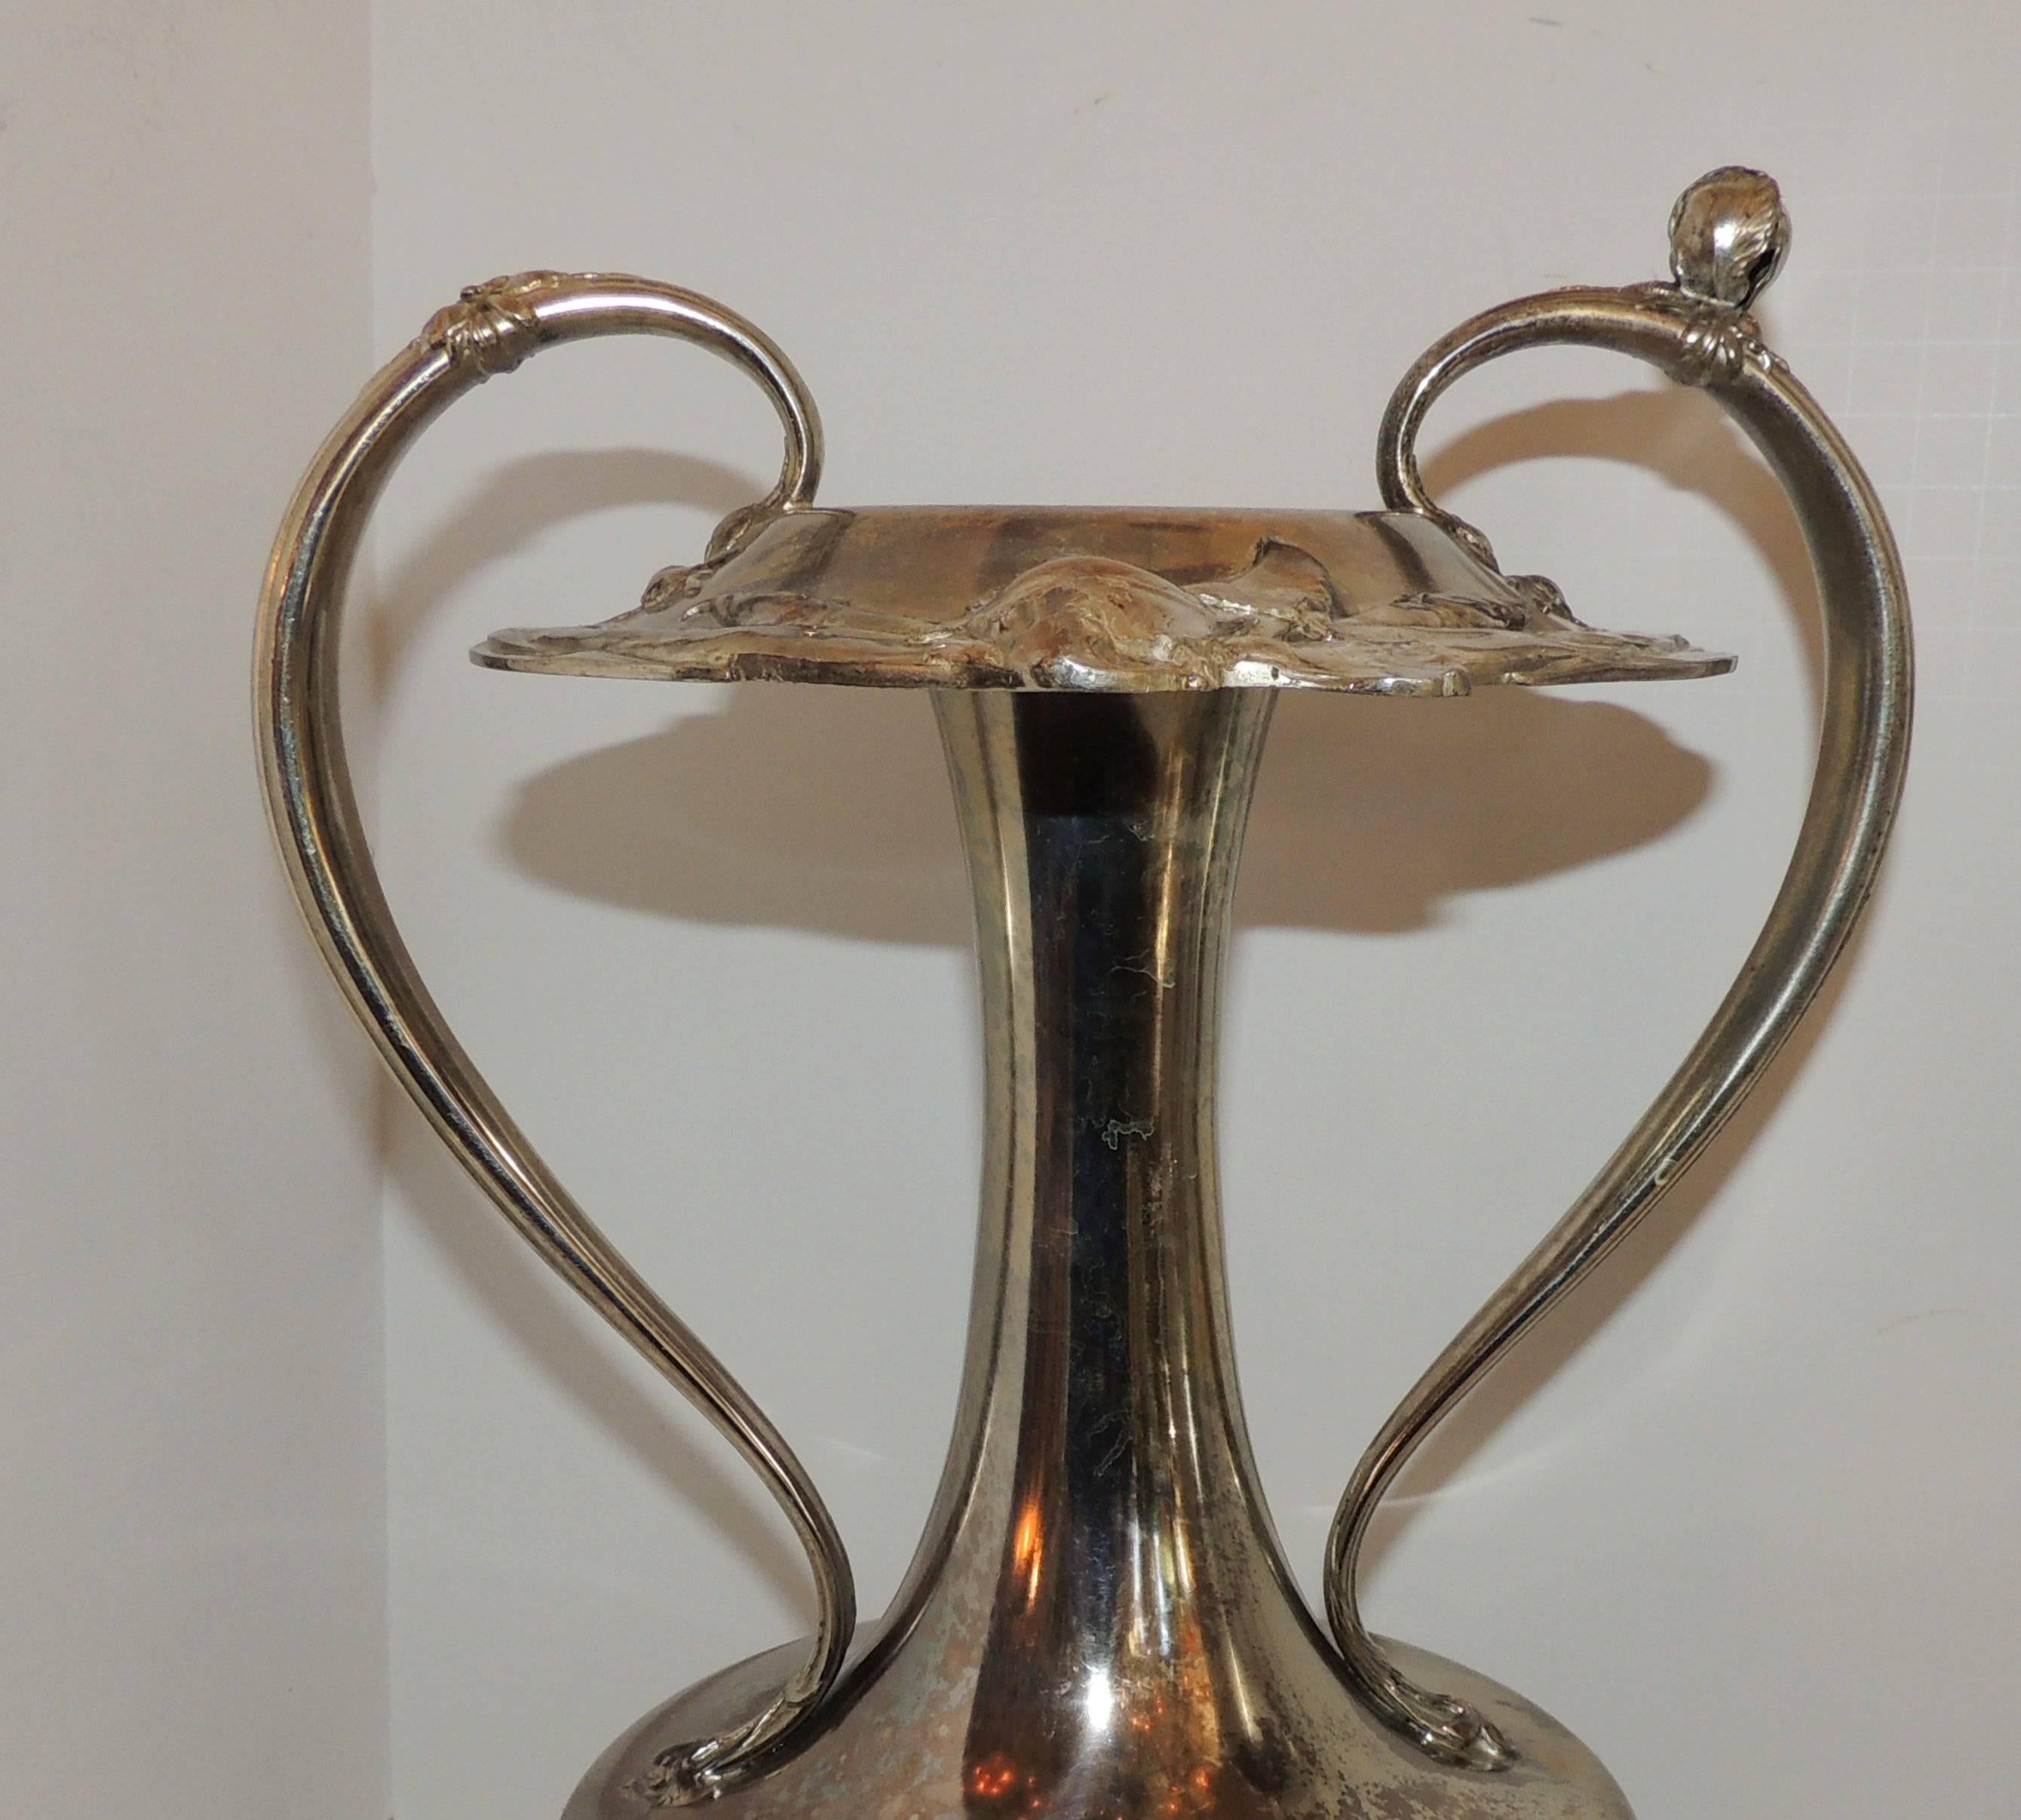 Large Pair of Reed & Barton Art Nouveau Silver Plate Urn Handle Vases WMF Urns For Sale 2